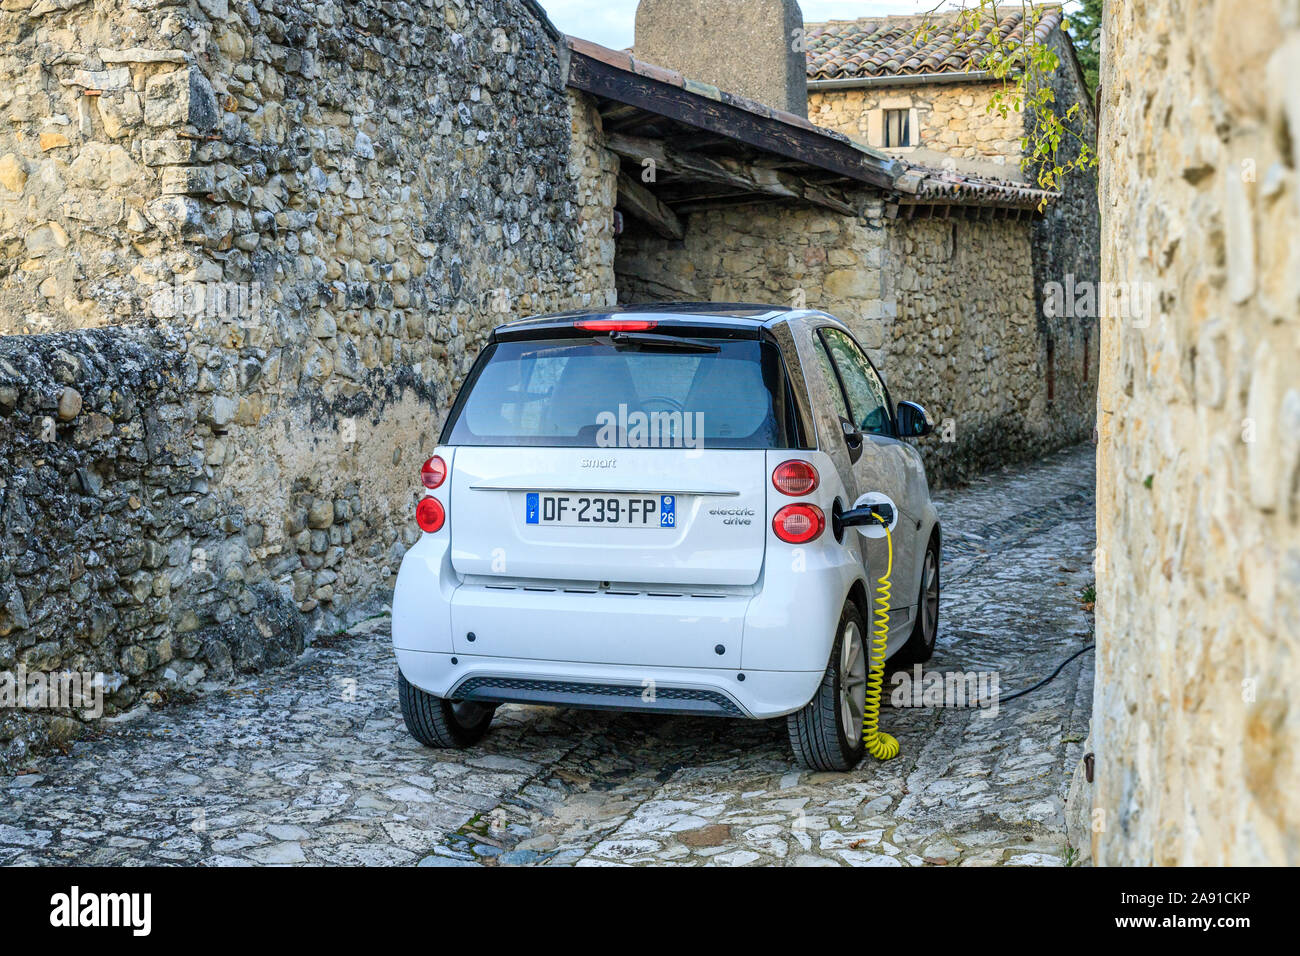 France, Drome, Mirmande, labelled Les Plus Beaux Villages de France (The Most beautiful Villages of France), electric car charging in a street of the Stock Photo